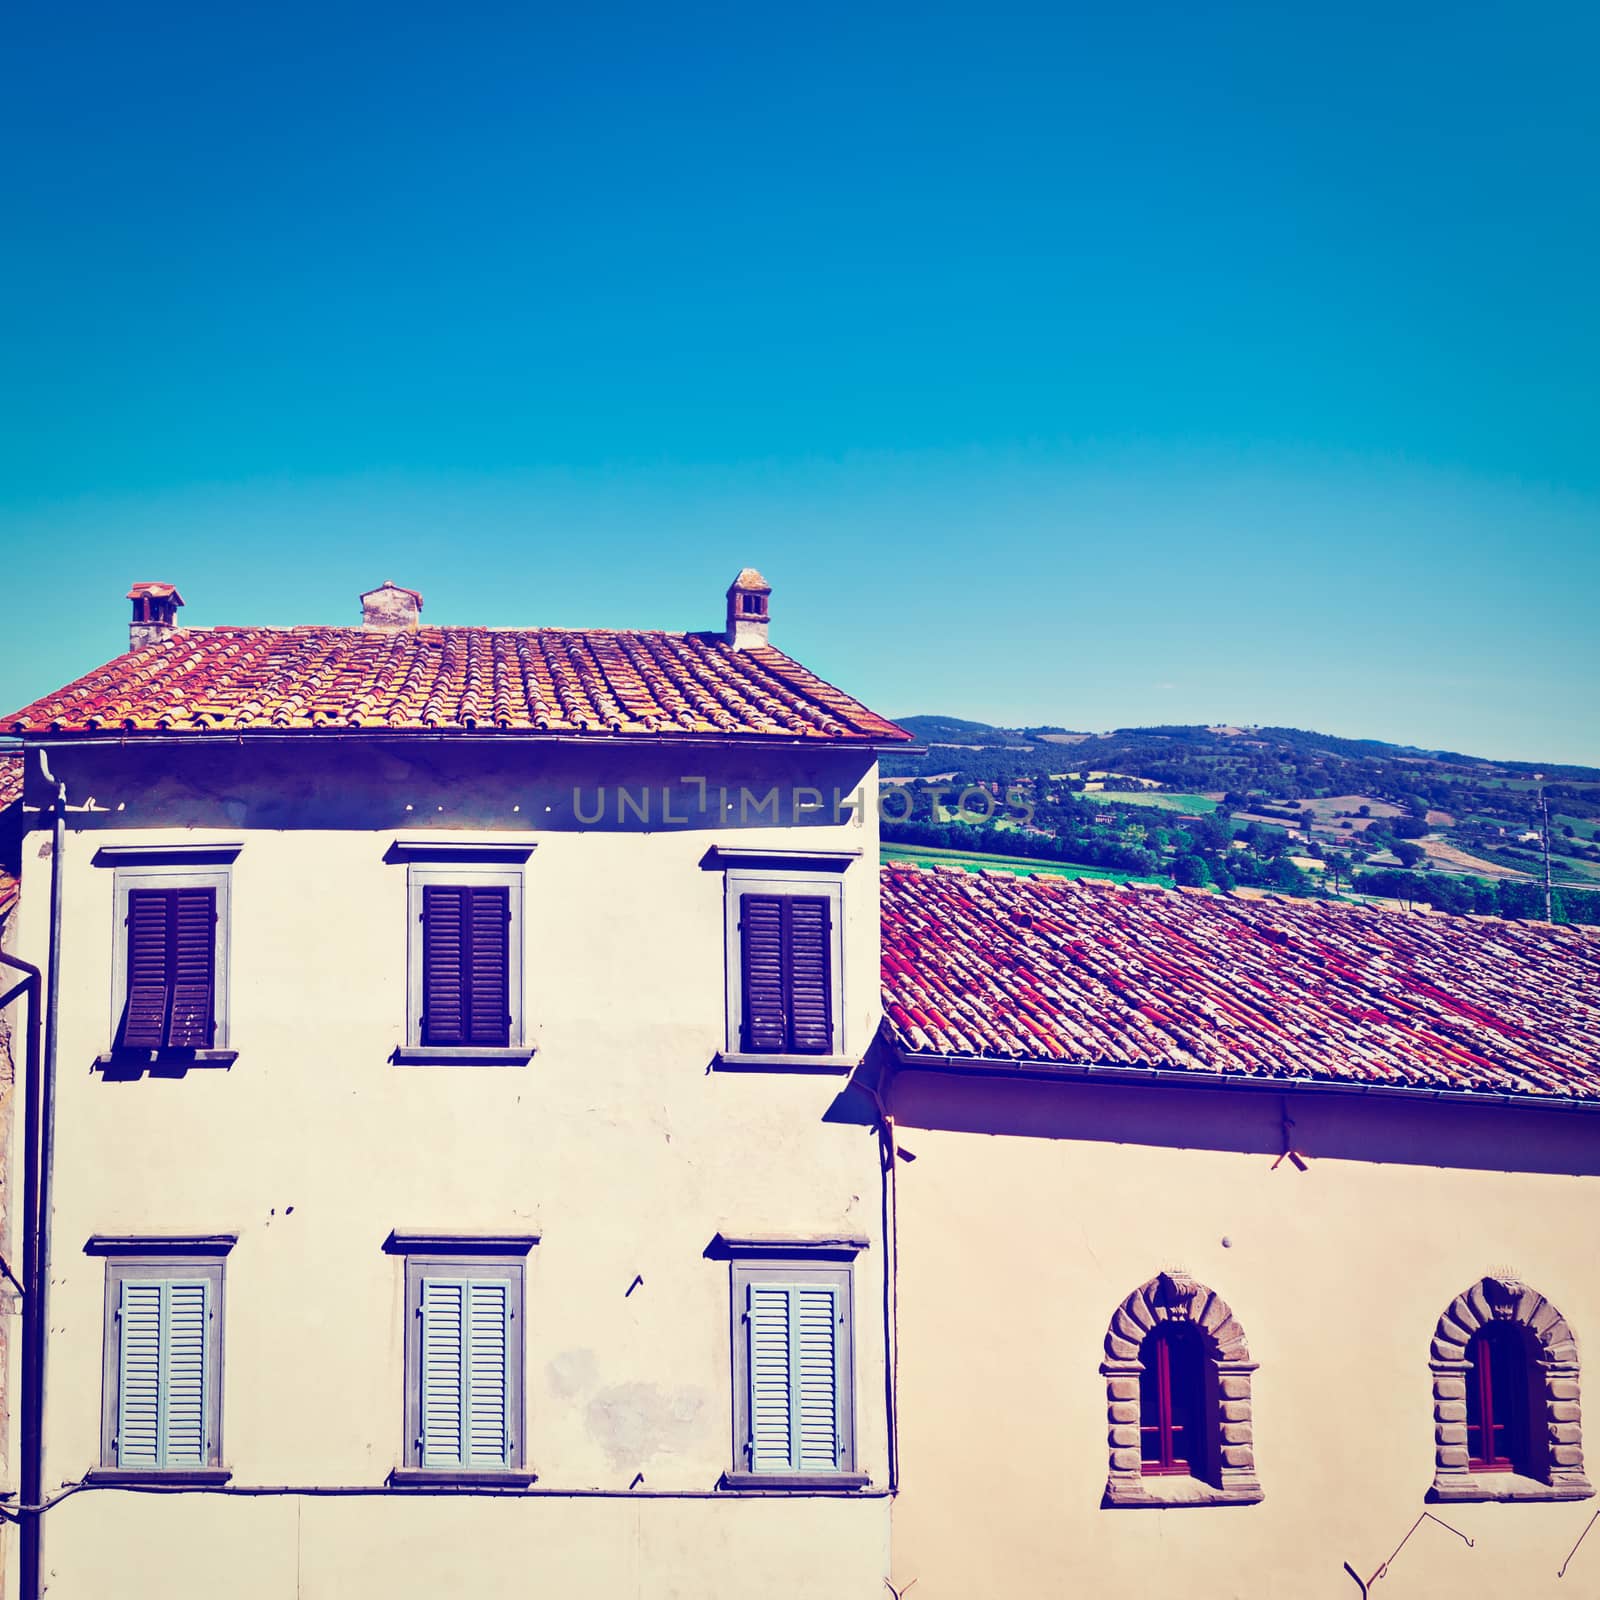 Facades of Old Italian Houses with Crumbling Plaster, Instagram Effect